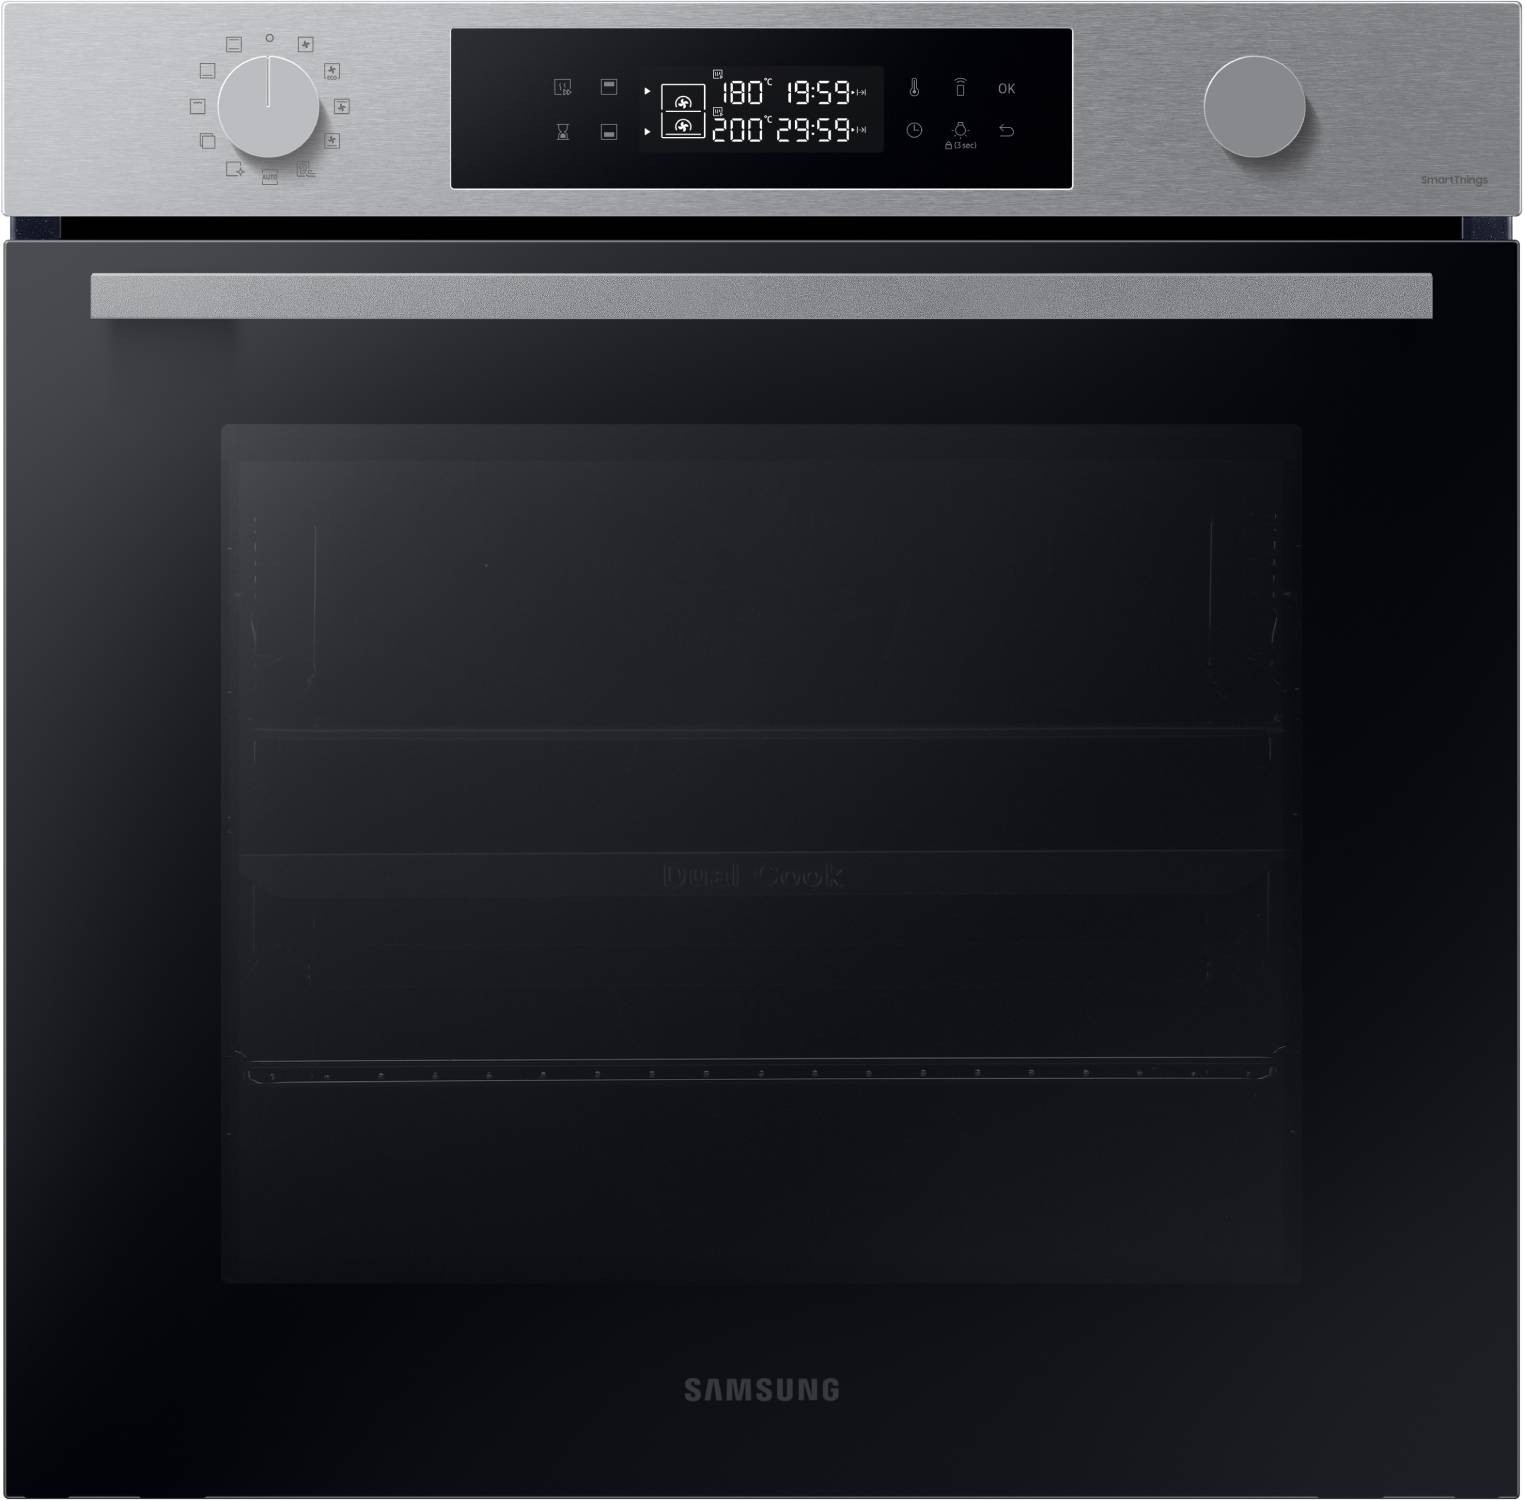 SAMSUNG Four encastrable pyrolyse Multifonction Twin Convection Wi-Fi 76L Inox   NV7B4430ZAS